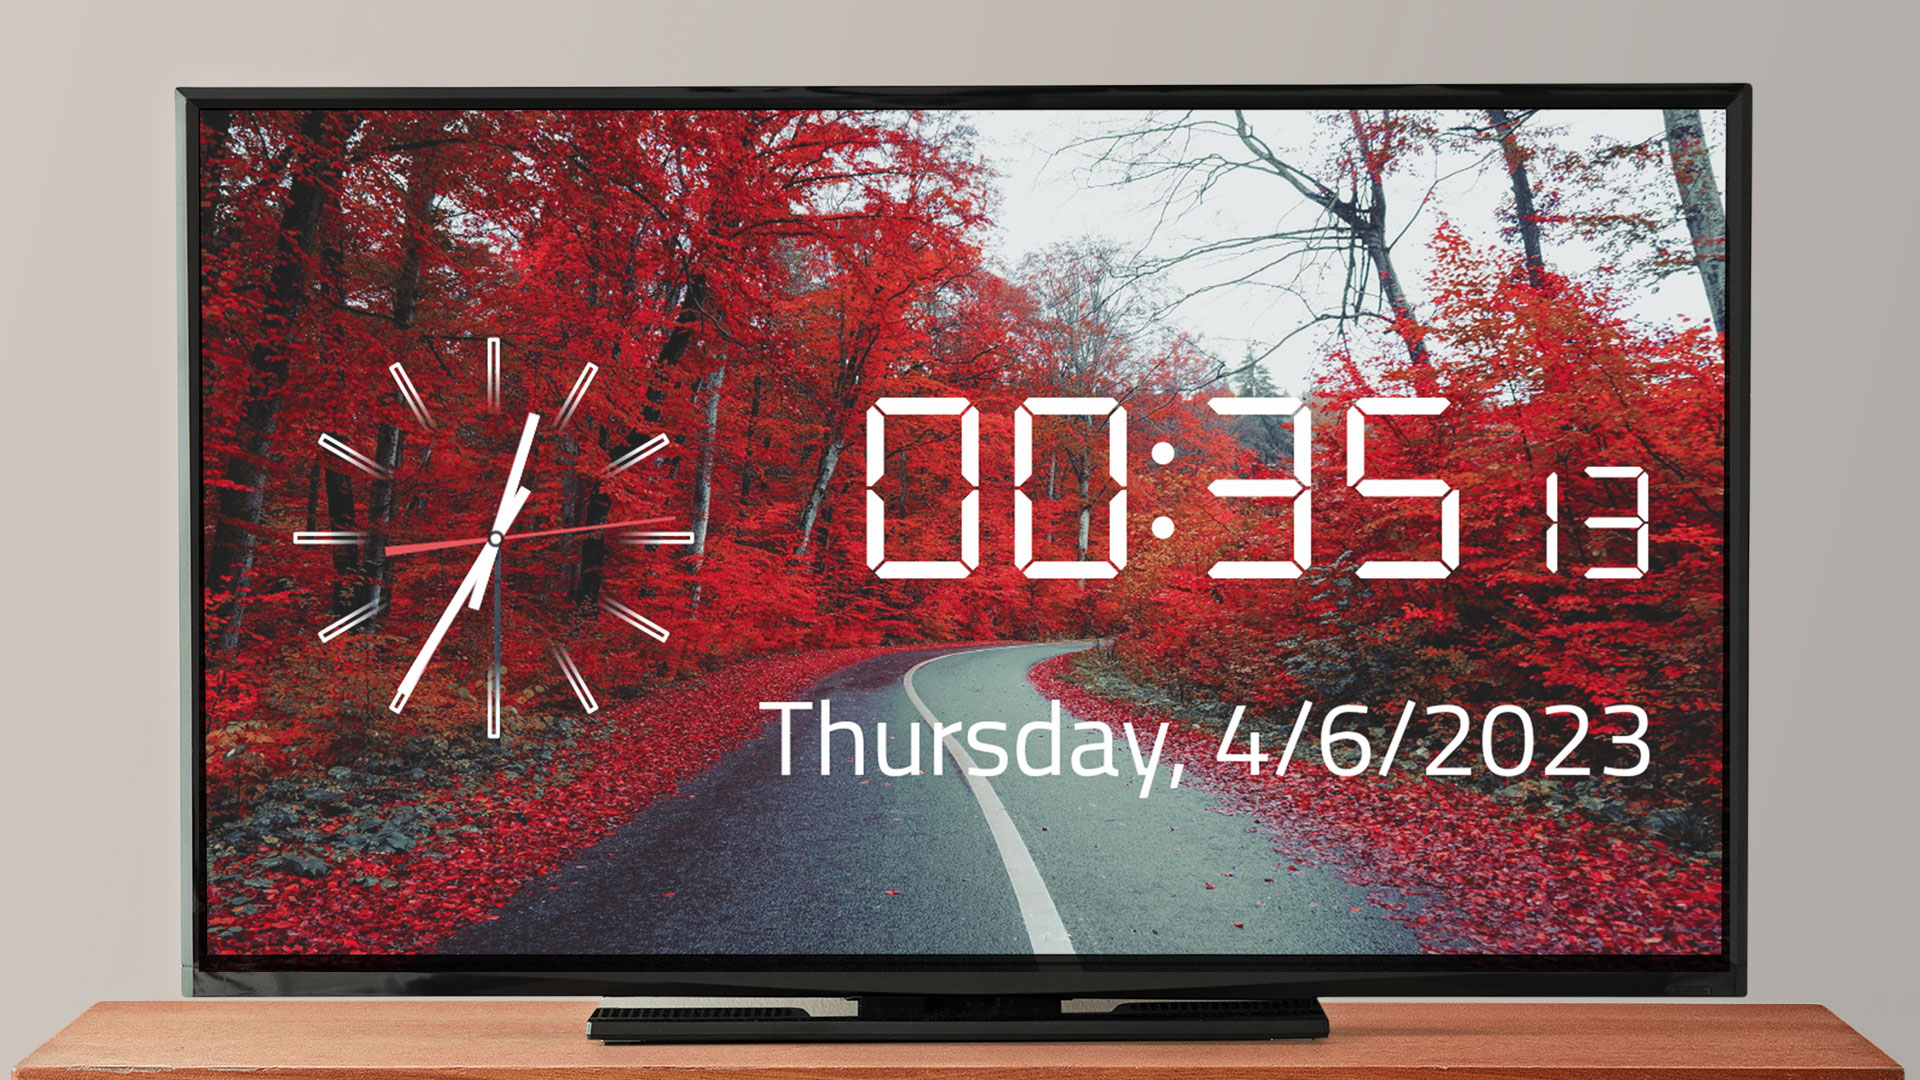 Autumn Ambience Clock HD: Analog And Digital Clock Screensaver For Tablets And Fire TV - NO ADS